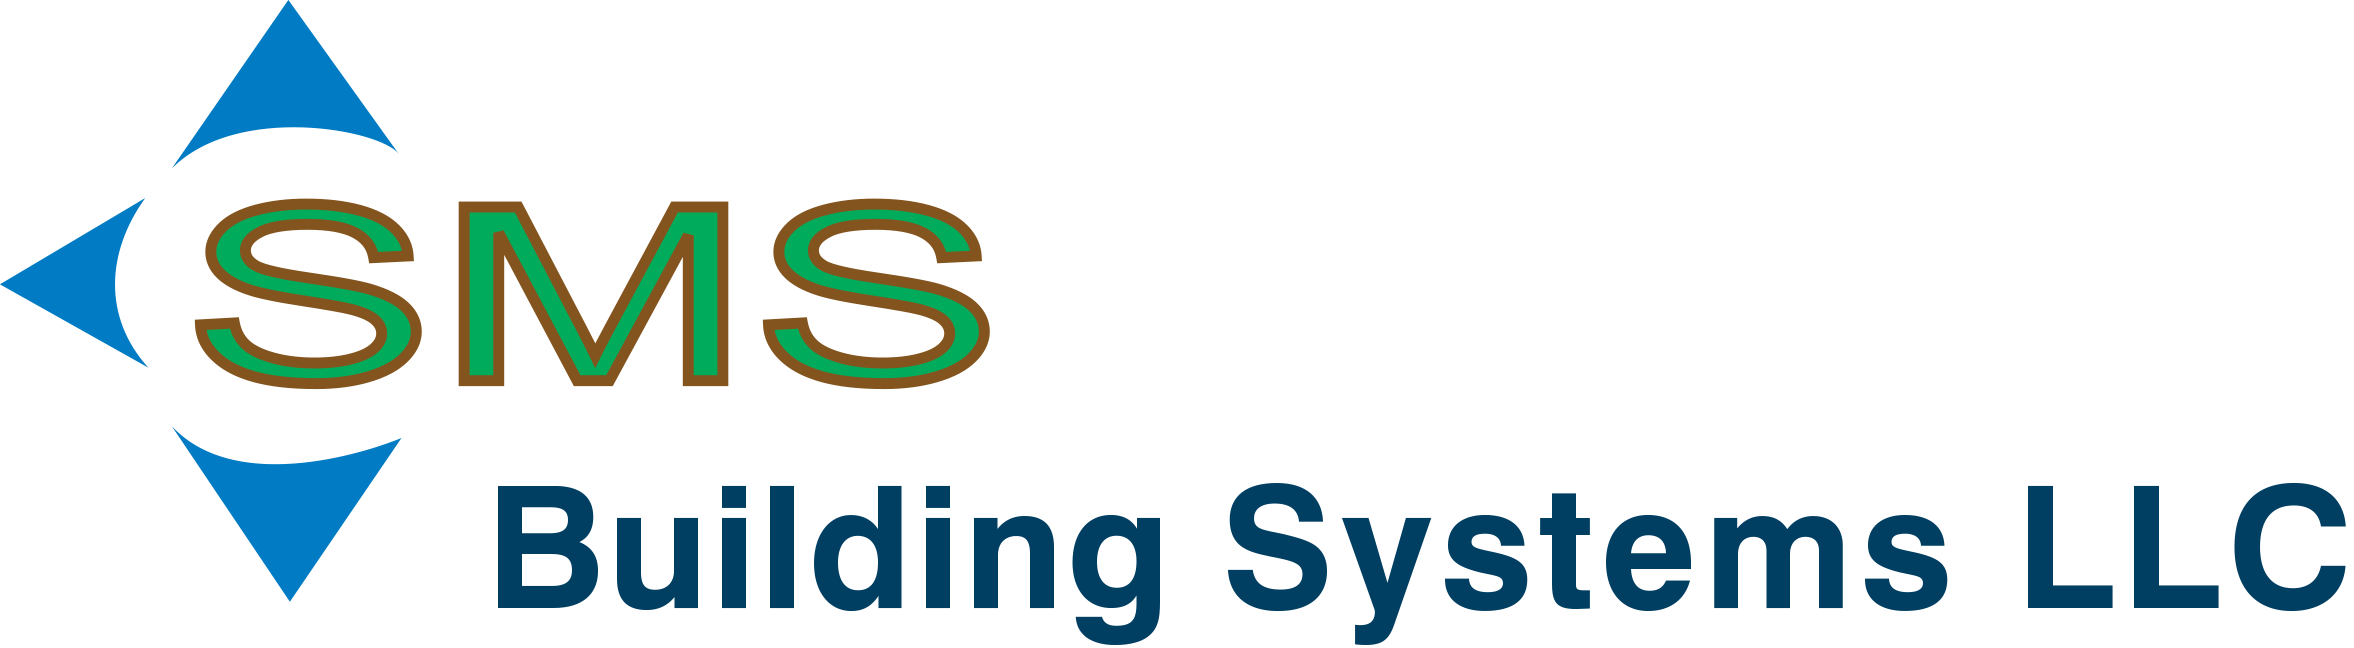 SMS Building Systems